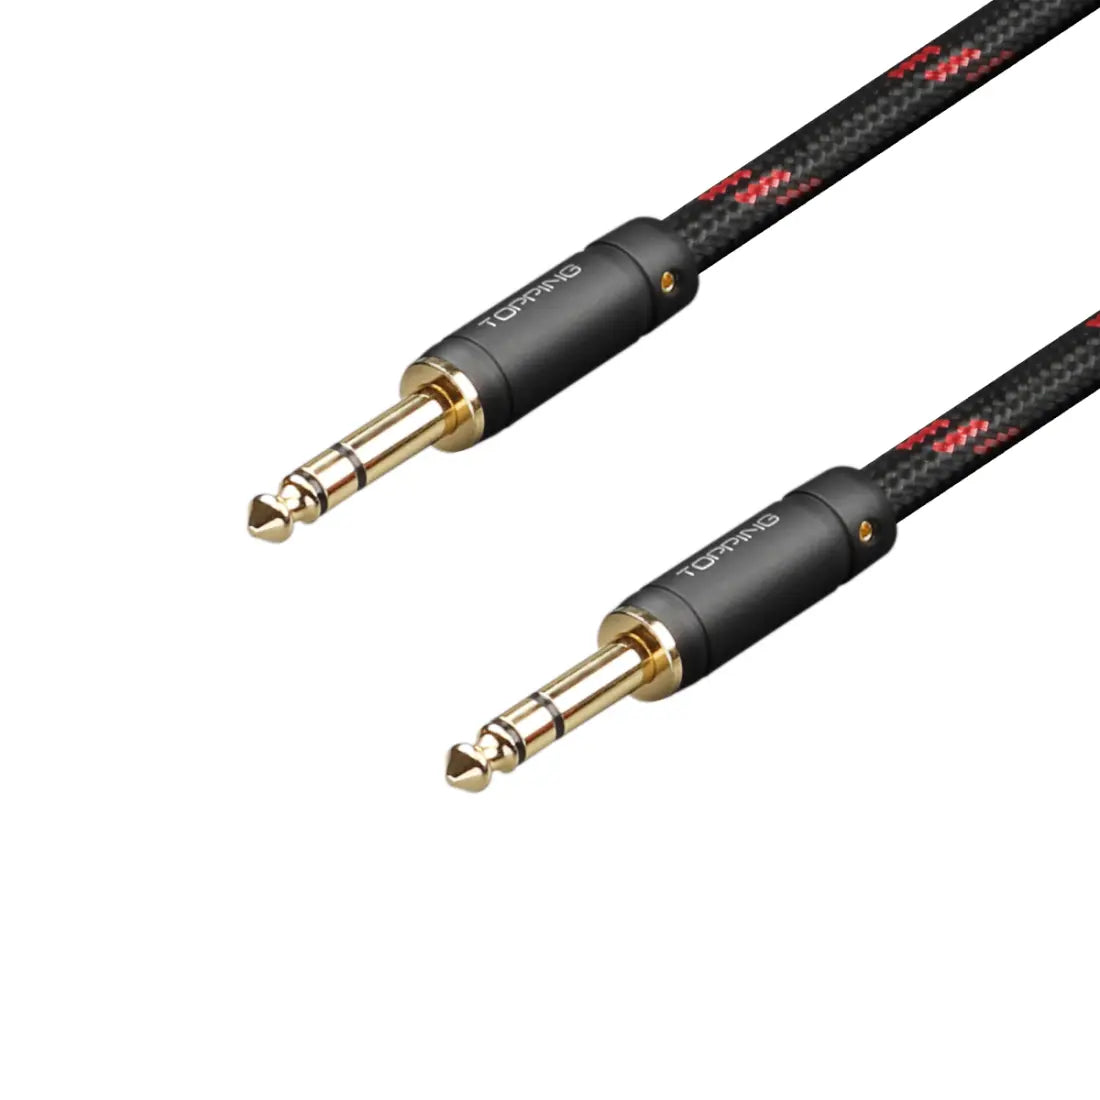 [5% off] TOPPING TCT1-75 6N Single Crystal Copper Silver-Plated Signal Cables